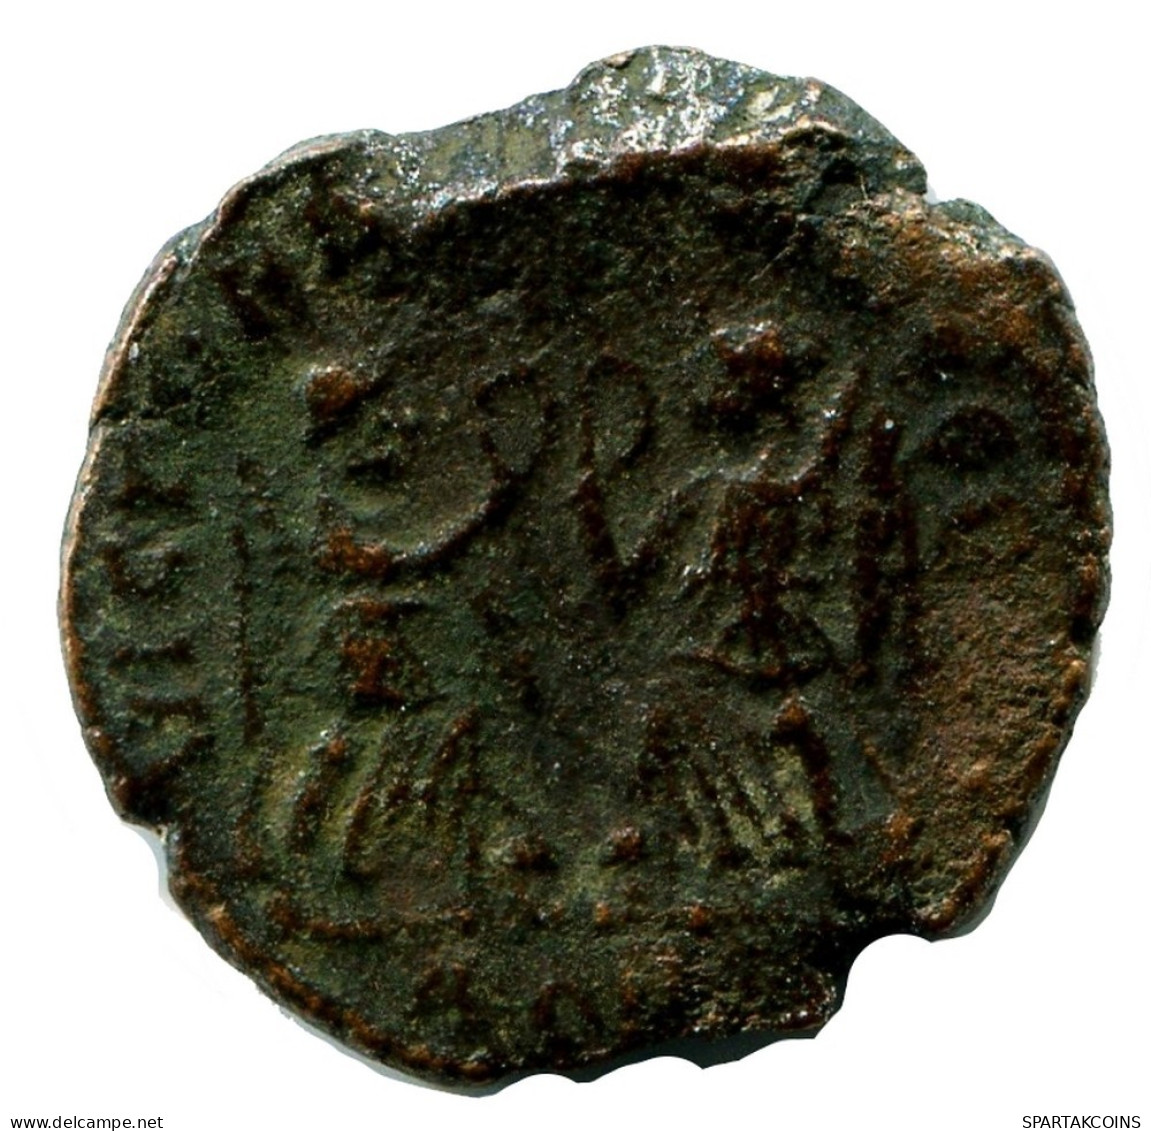 CONSTANS MINTED IN AGUILEIA ITALY FROM THE ROYAL ONTARIO MUSEUM #ANC11552.14.E.A - El Imperio Christiano (307 / 363)